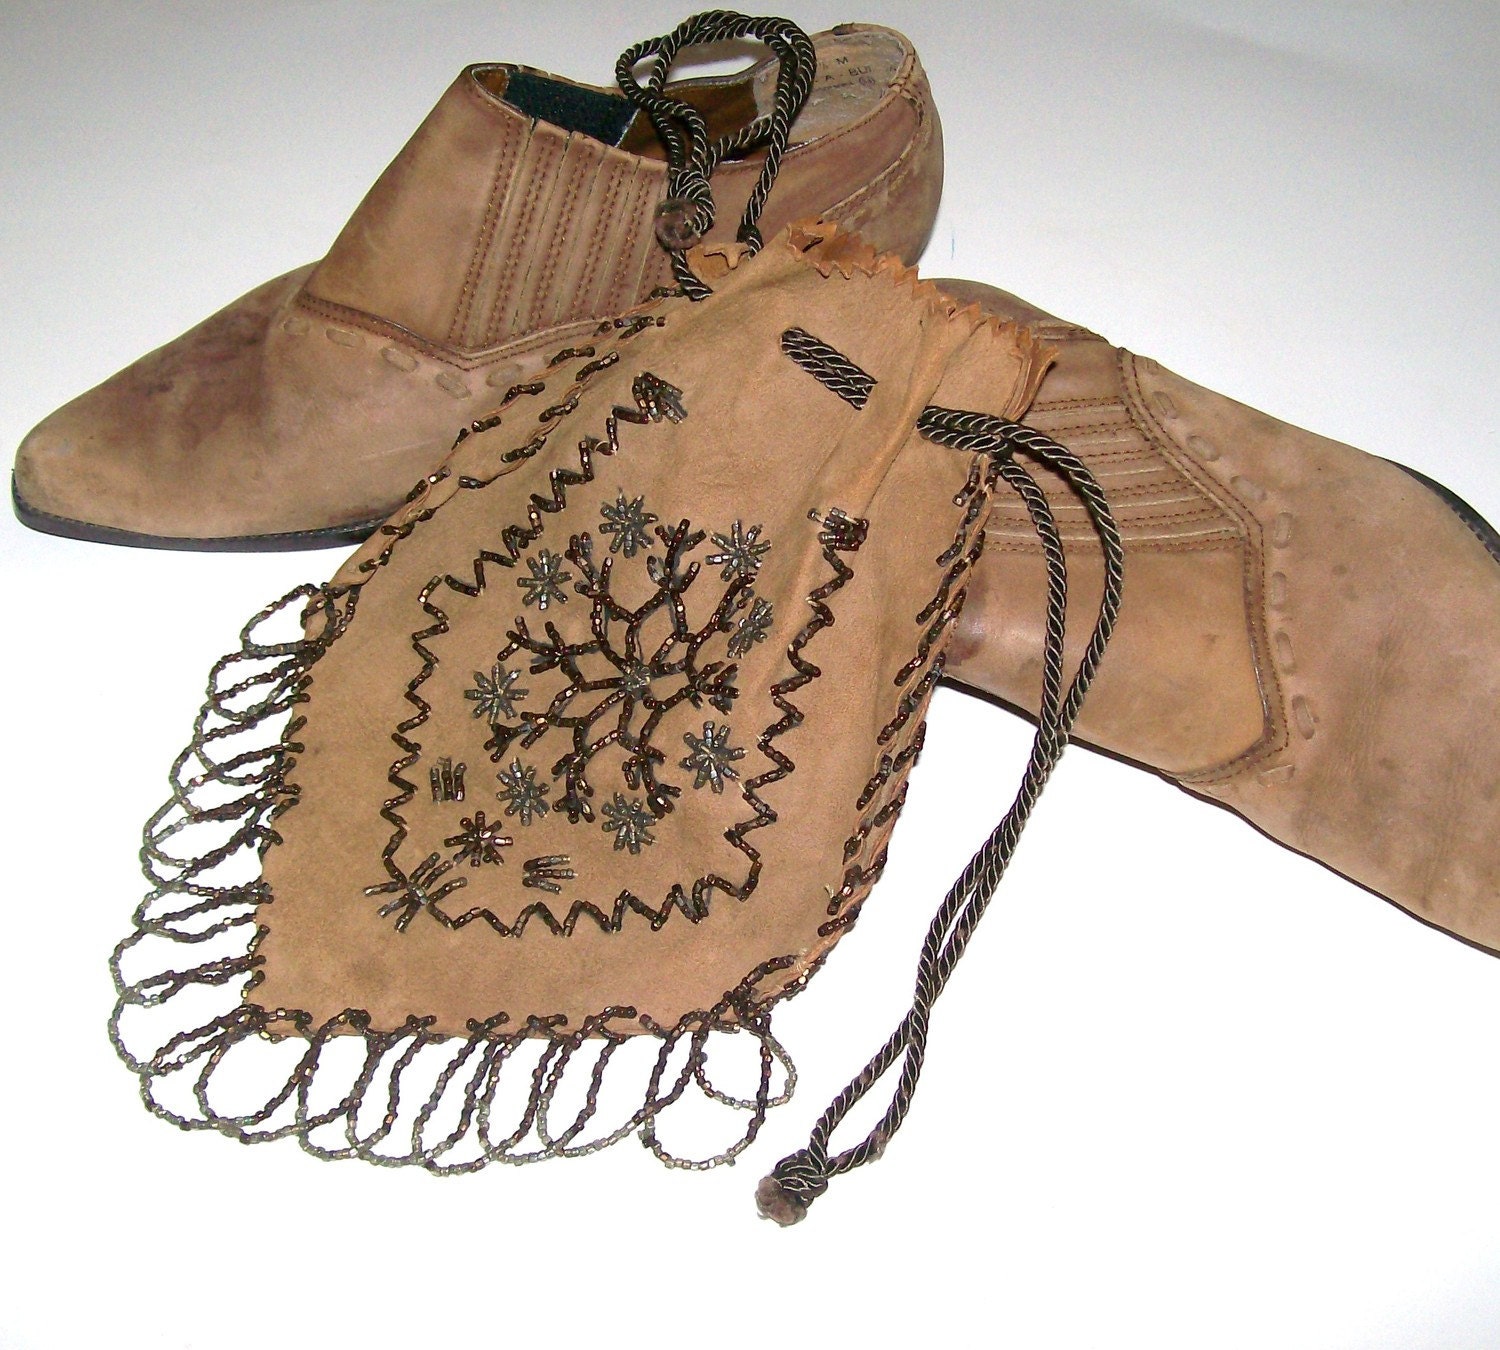 Vintage Tan Suede Boots Southwest Santa Fe Style American Cowgirl Boho URban Chic / Suede Drawsting Purse Size 7 1/2 M